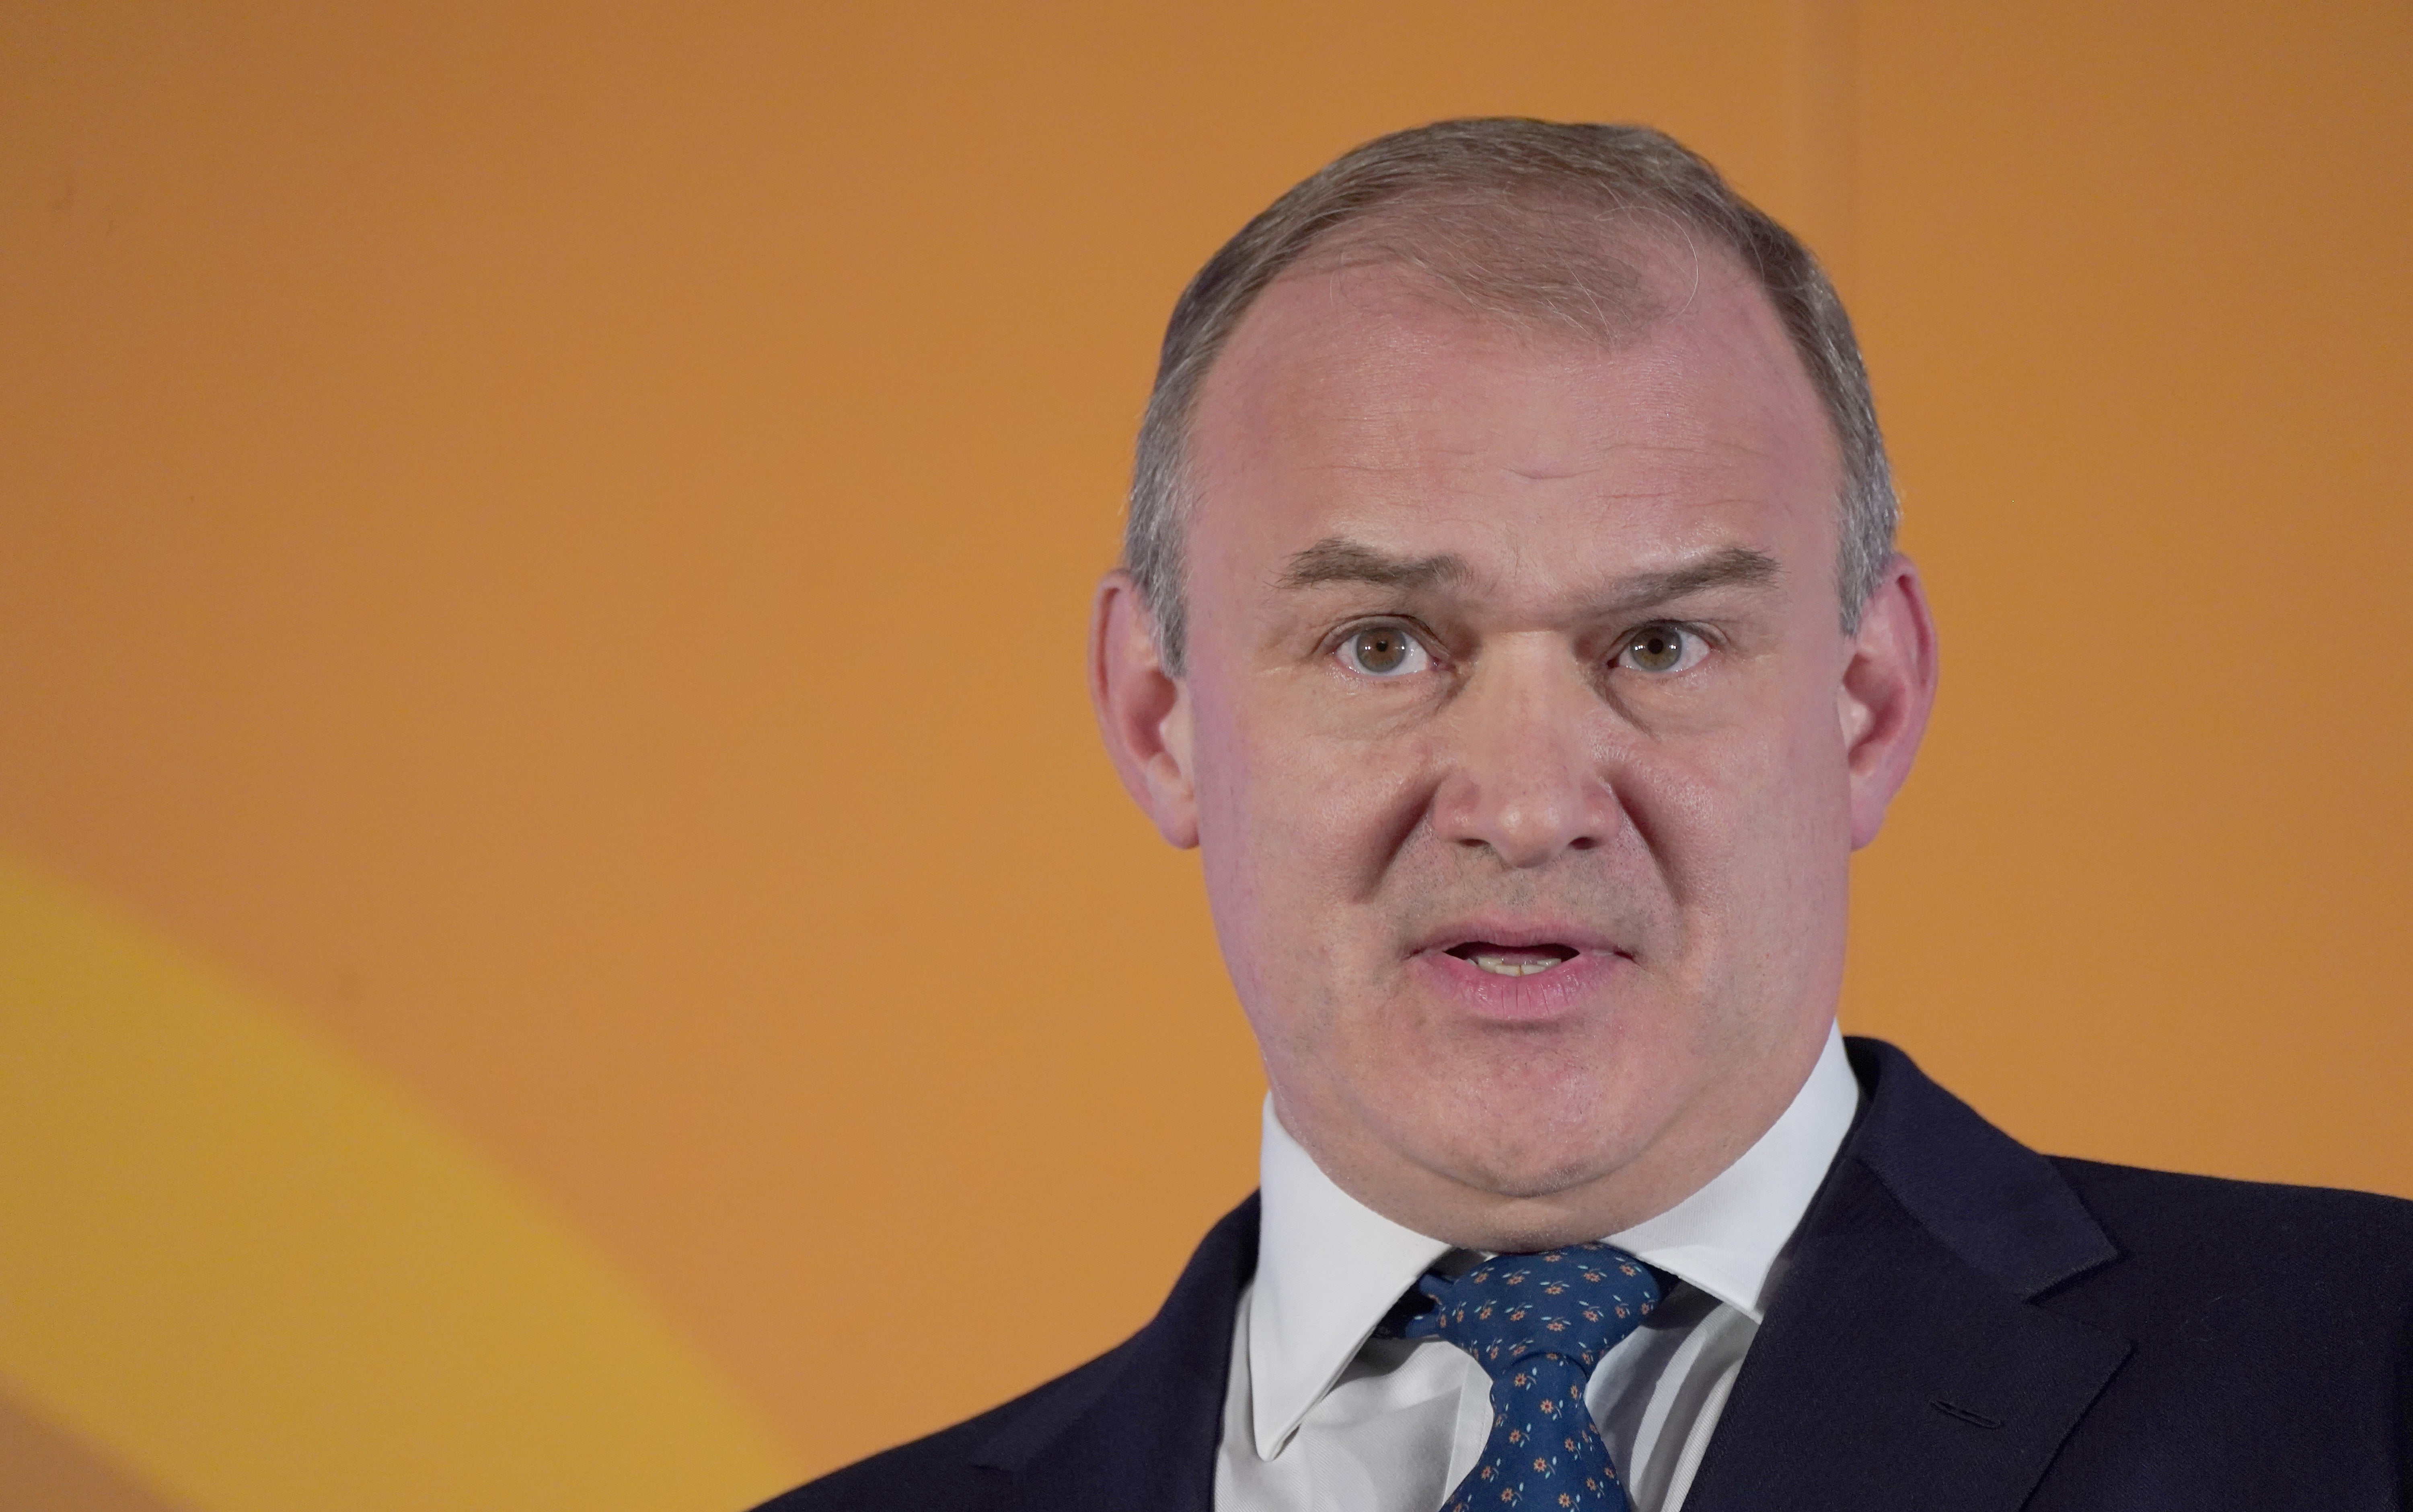 Lib Dem leader Sir Ed Davey said Britain needed a prime minister the public could trust at a time of international crisis (Ian West/PA)